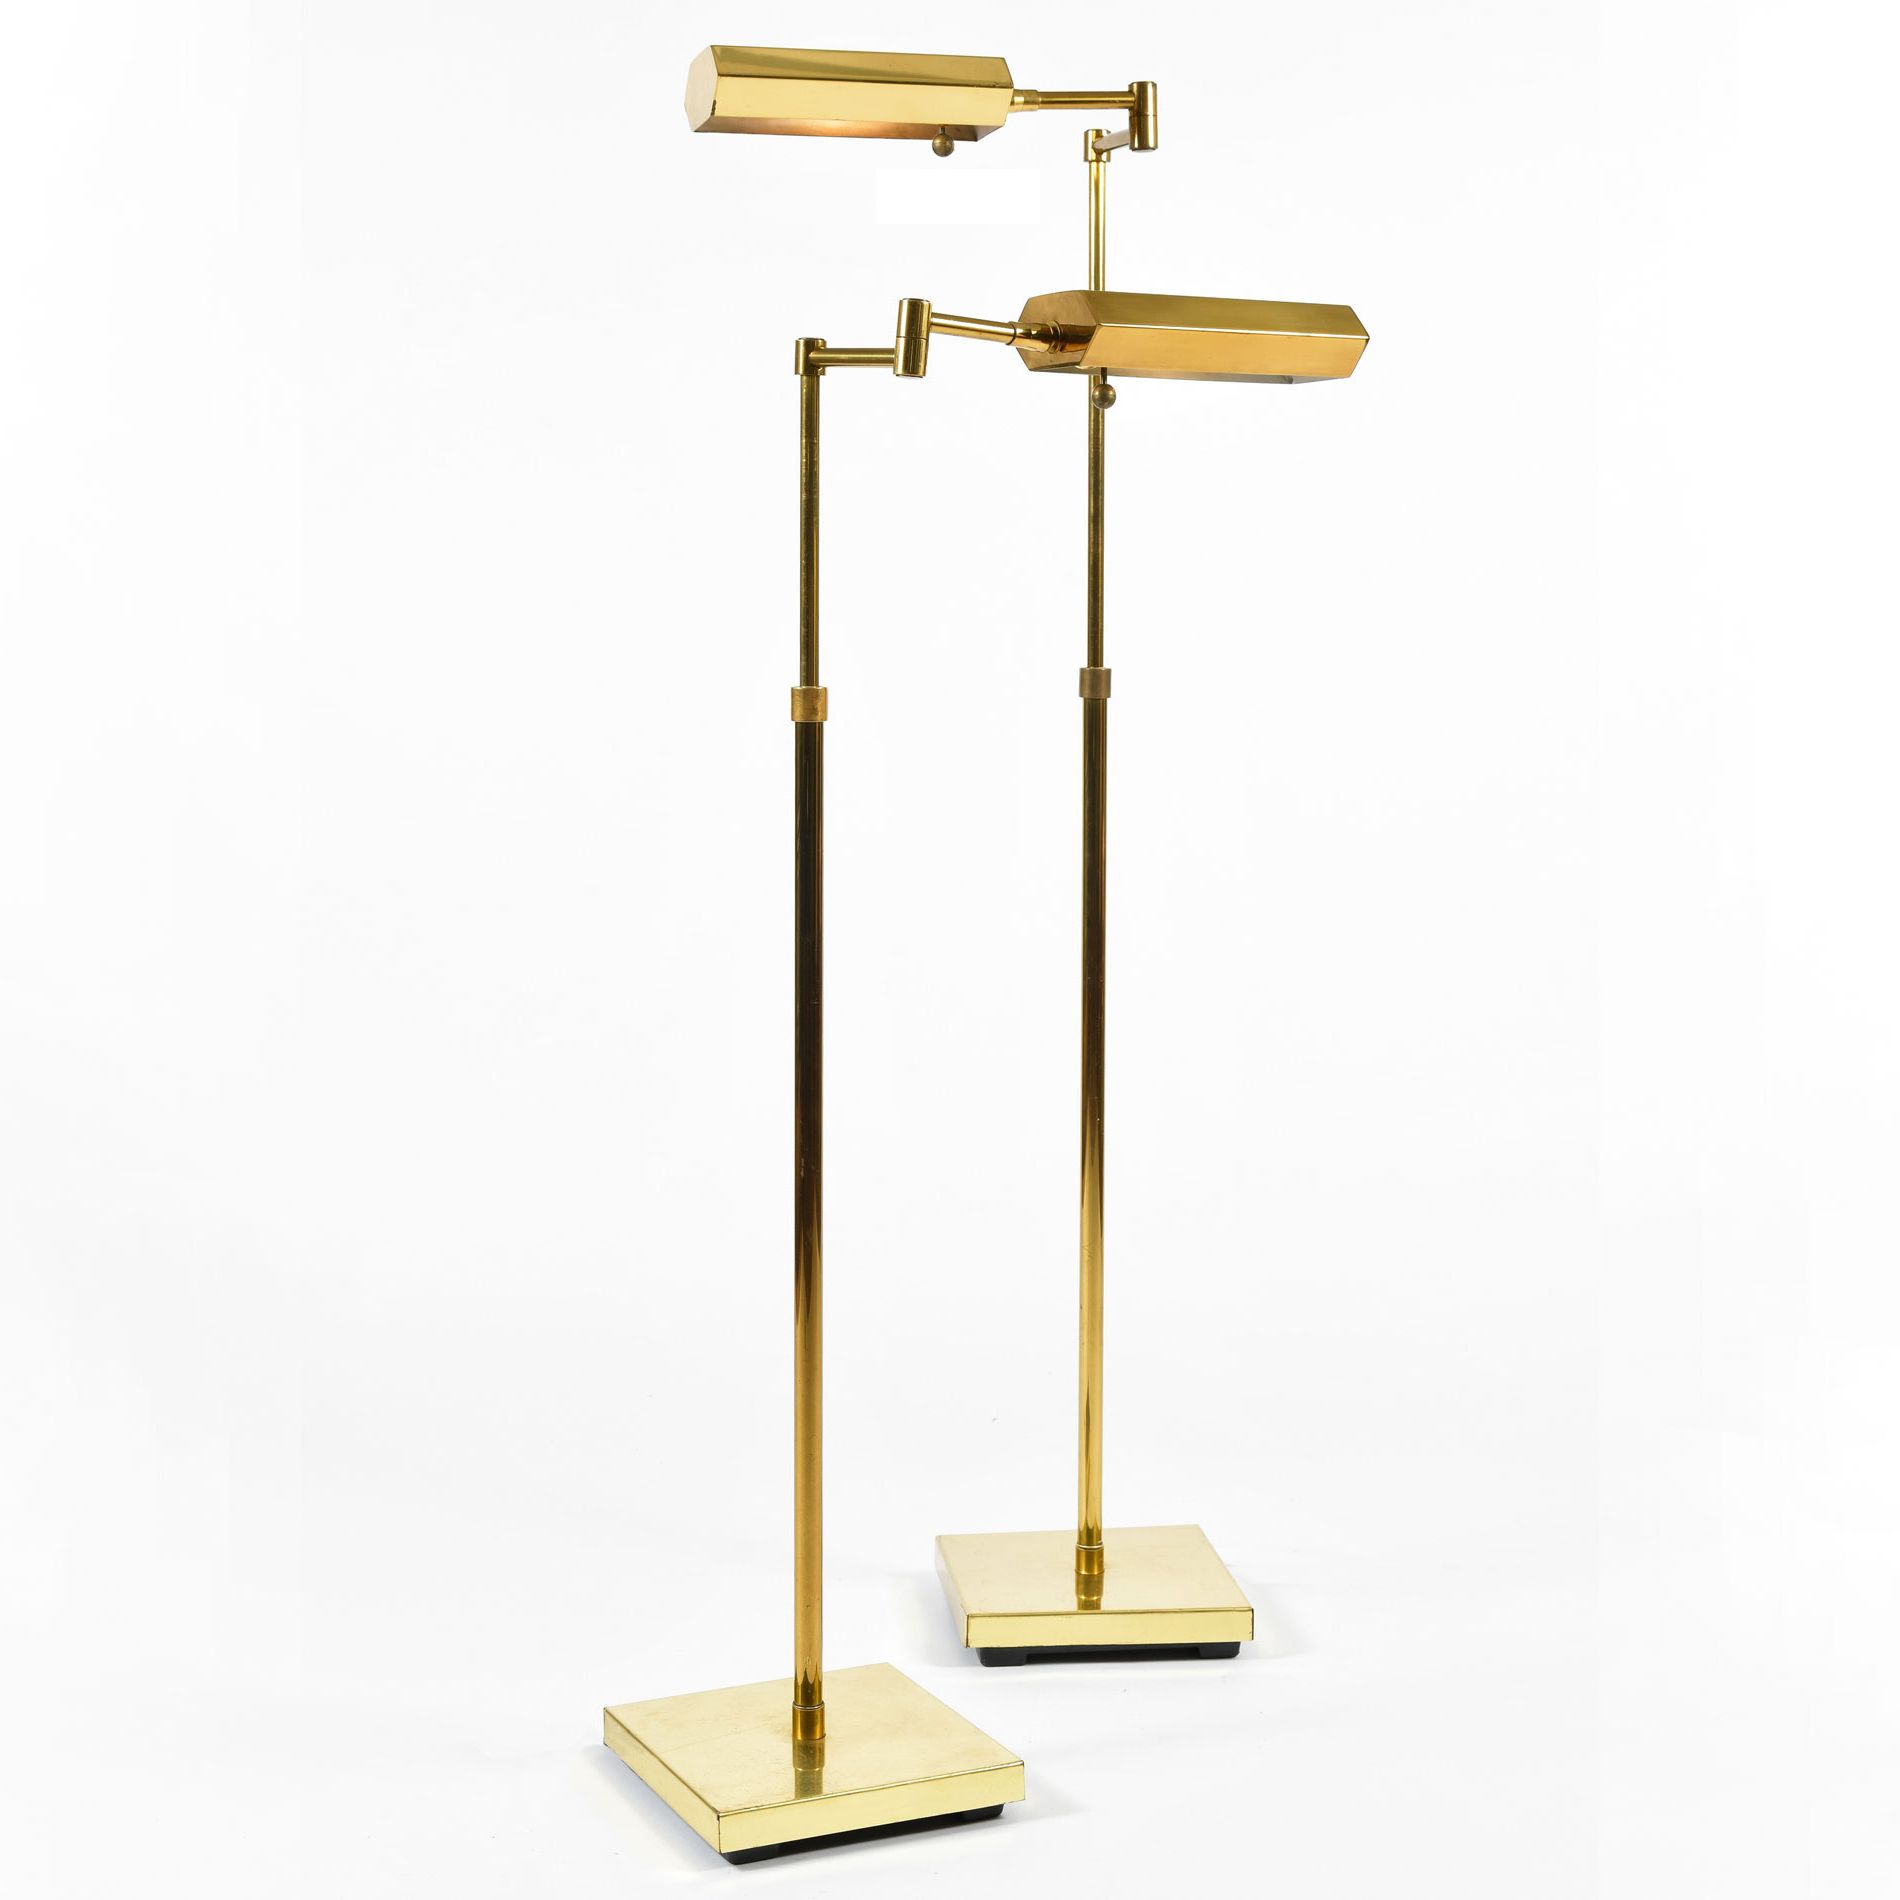 Valerie Wade Throughout Most Recently Released Brass Standing Lamps (View 4 of 10)